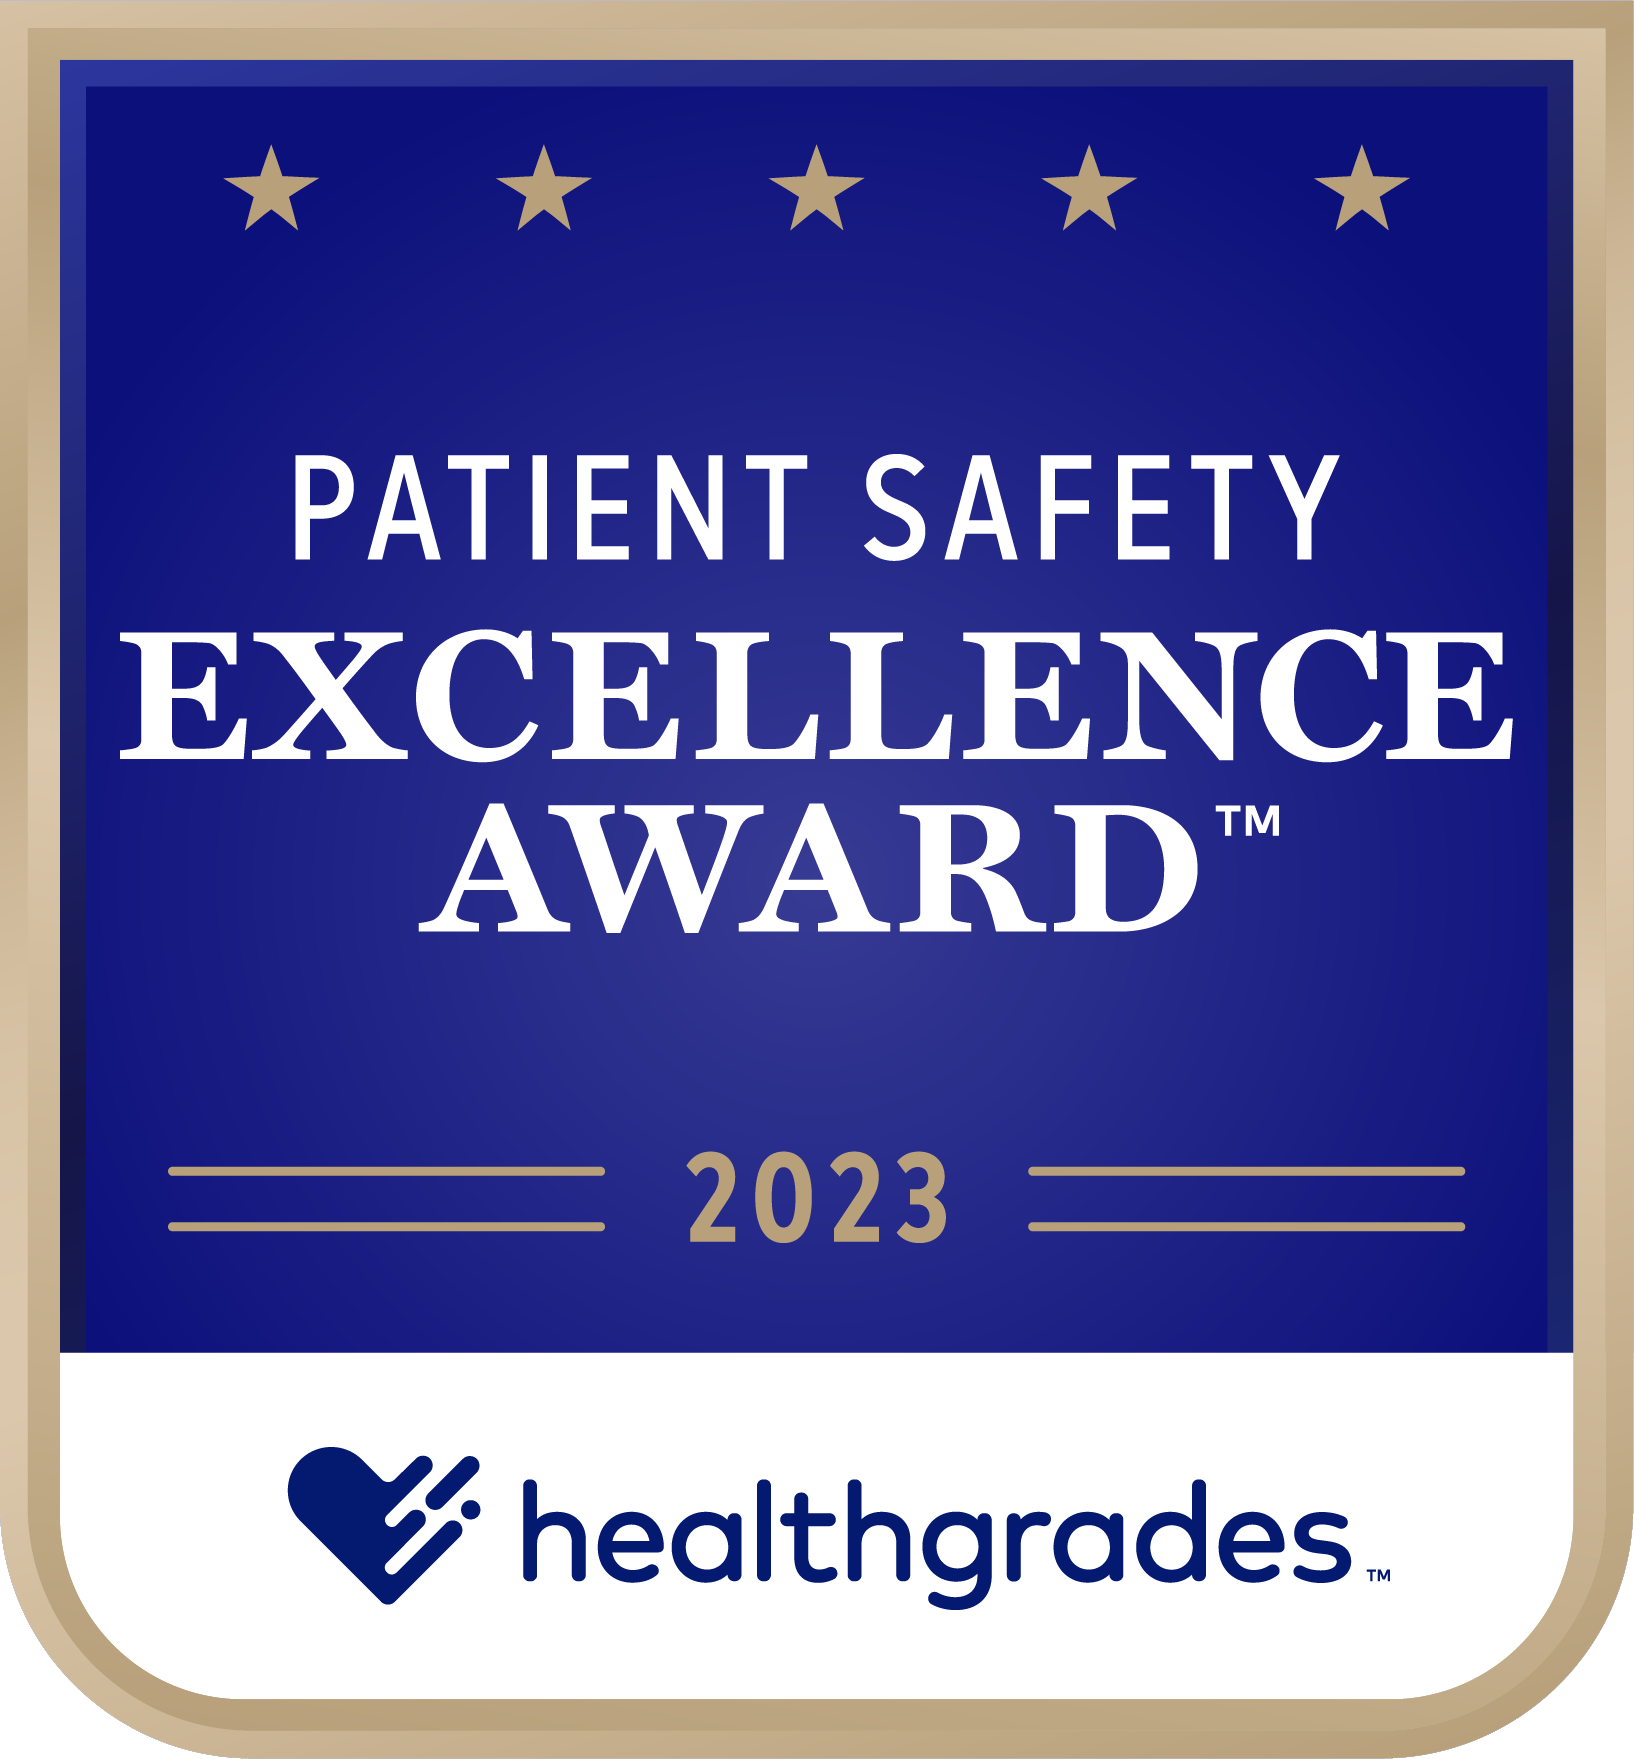 HG_Patient_Safety_Award_2023